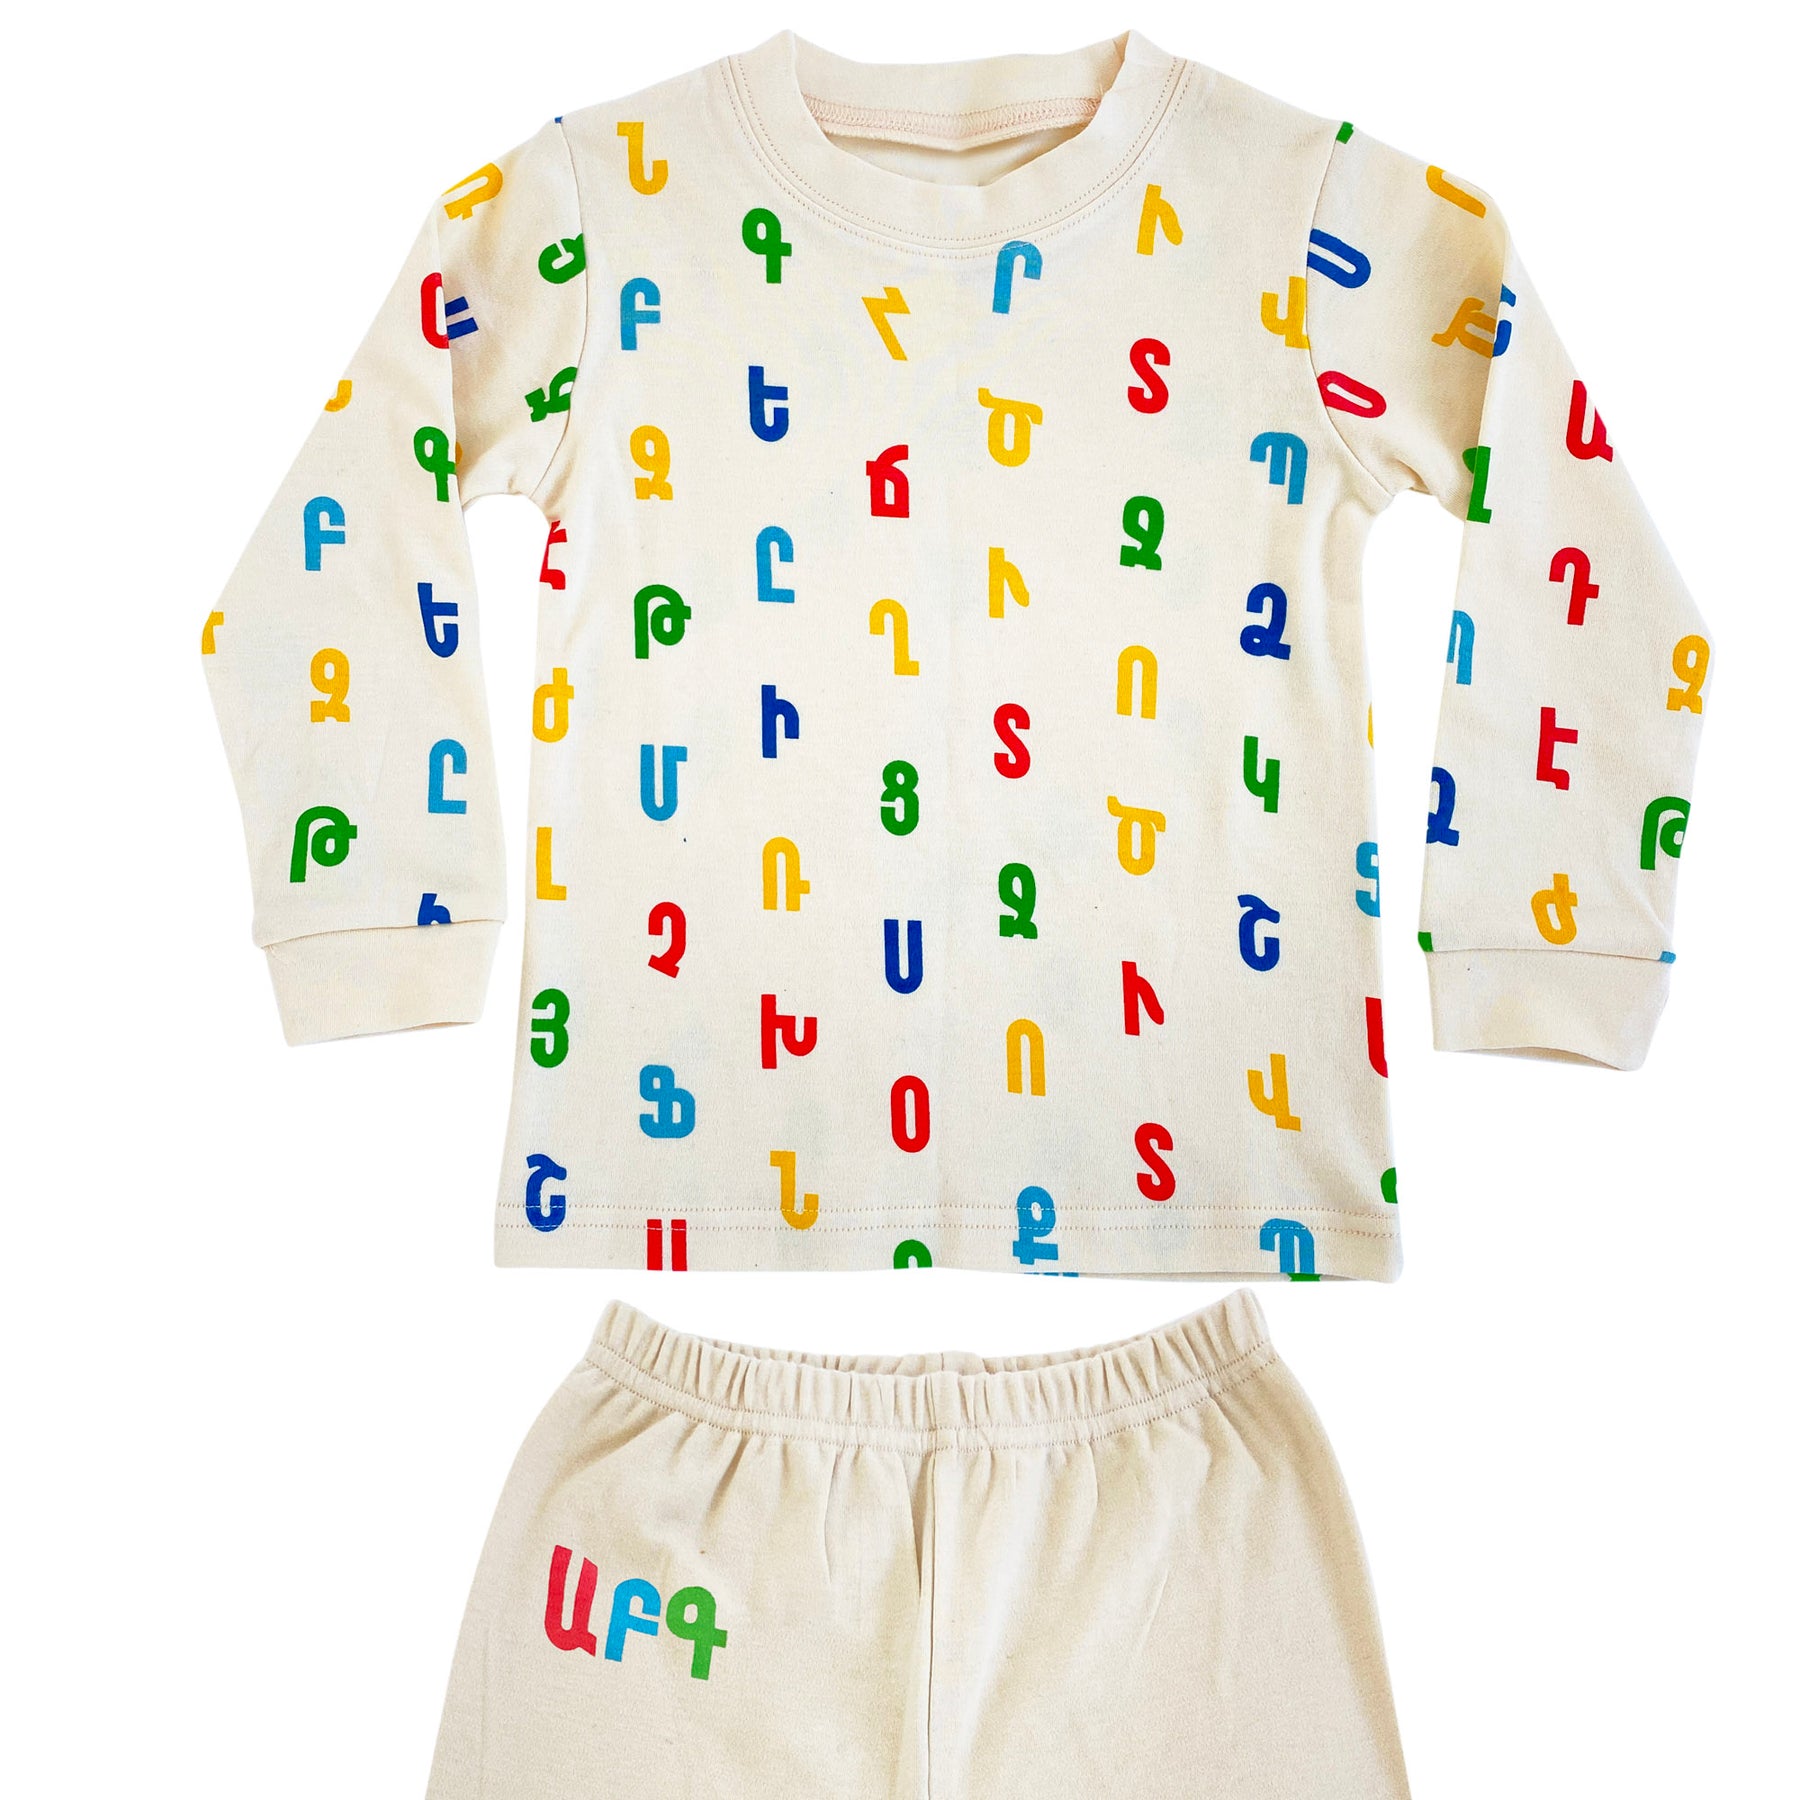 SECONDS (Garment May have minor flaws with printing/stitching - Armenian Alphabet Toddler Pajama Set